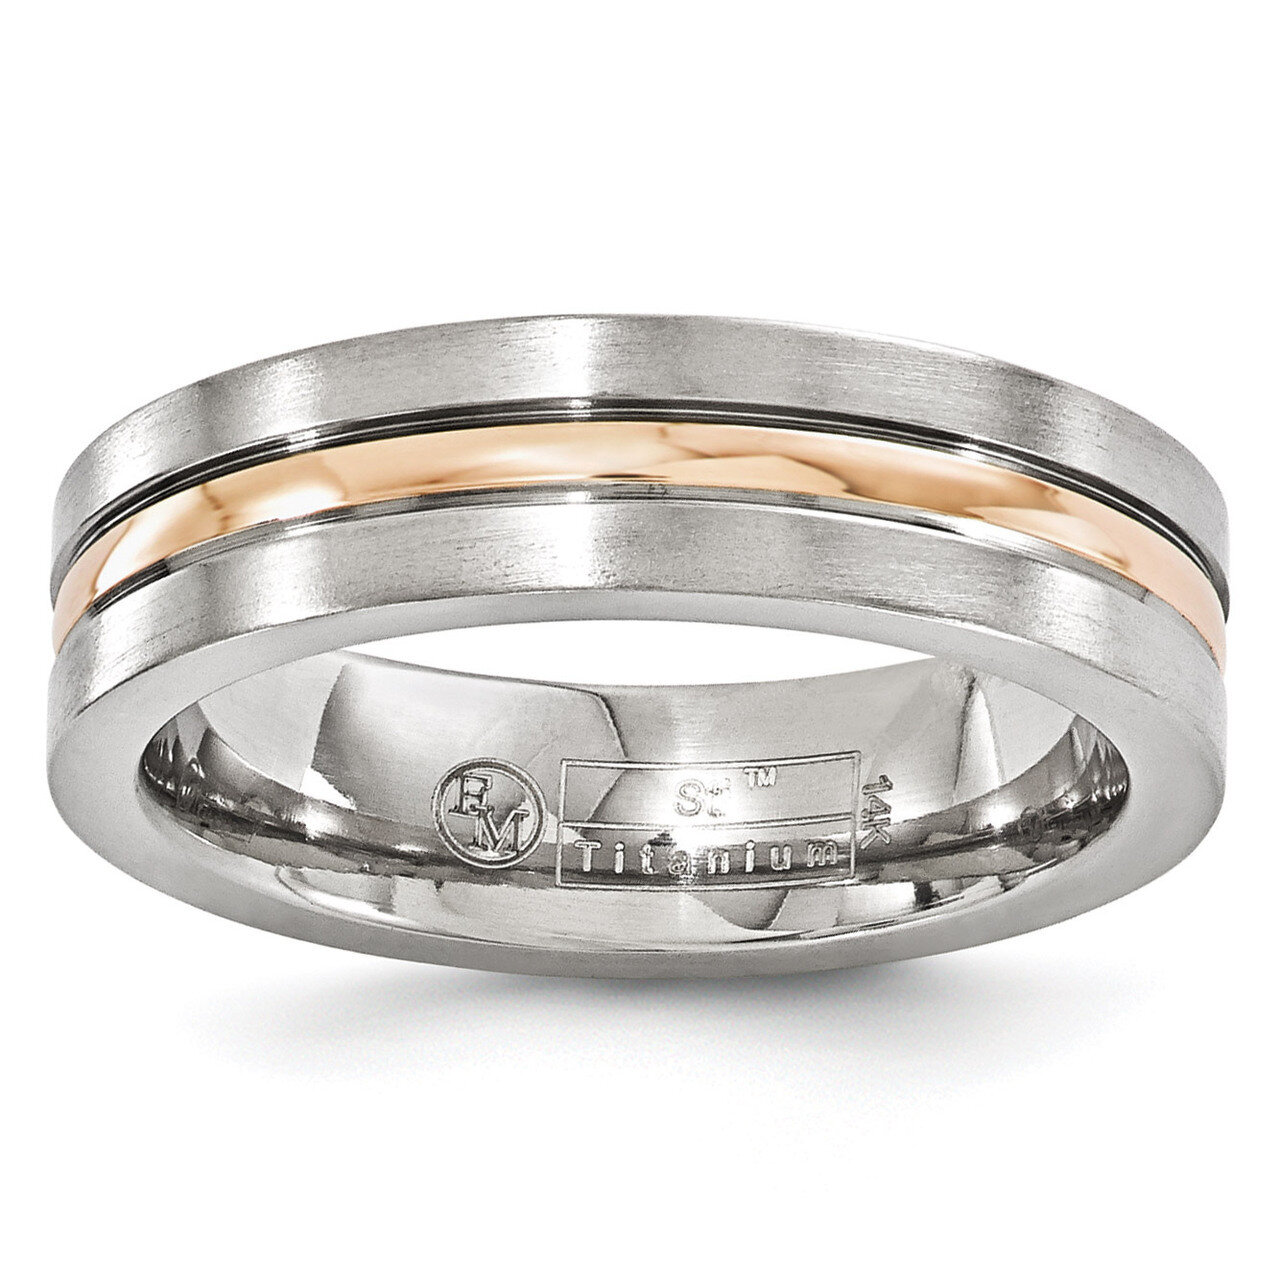 Edward Mirell Titanium and 14k Rose Gold Grooved 6mm Band EMR205